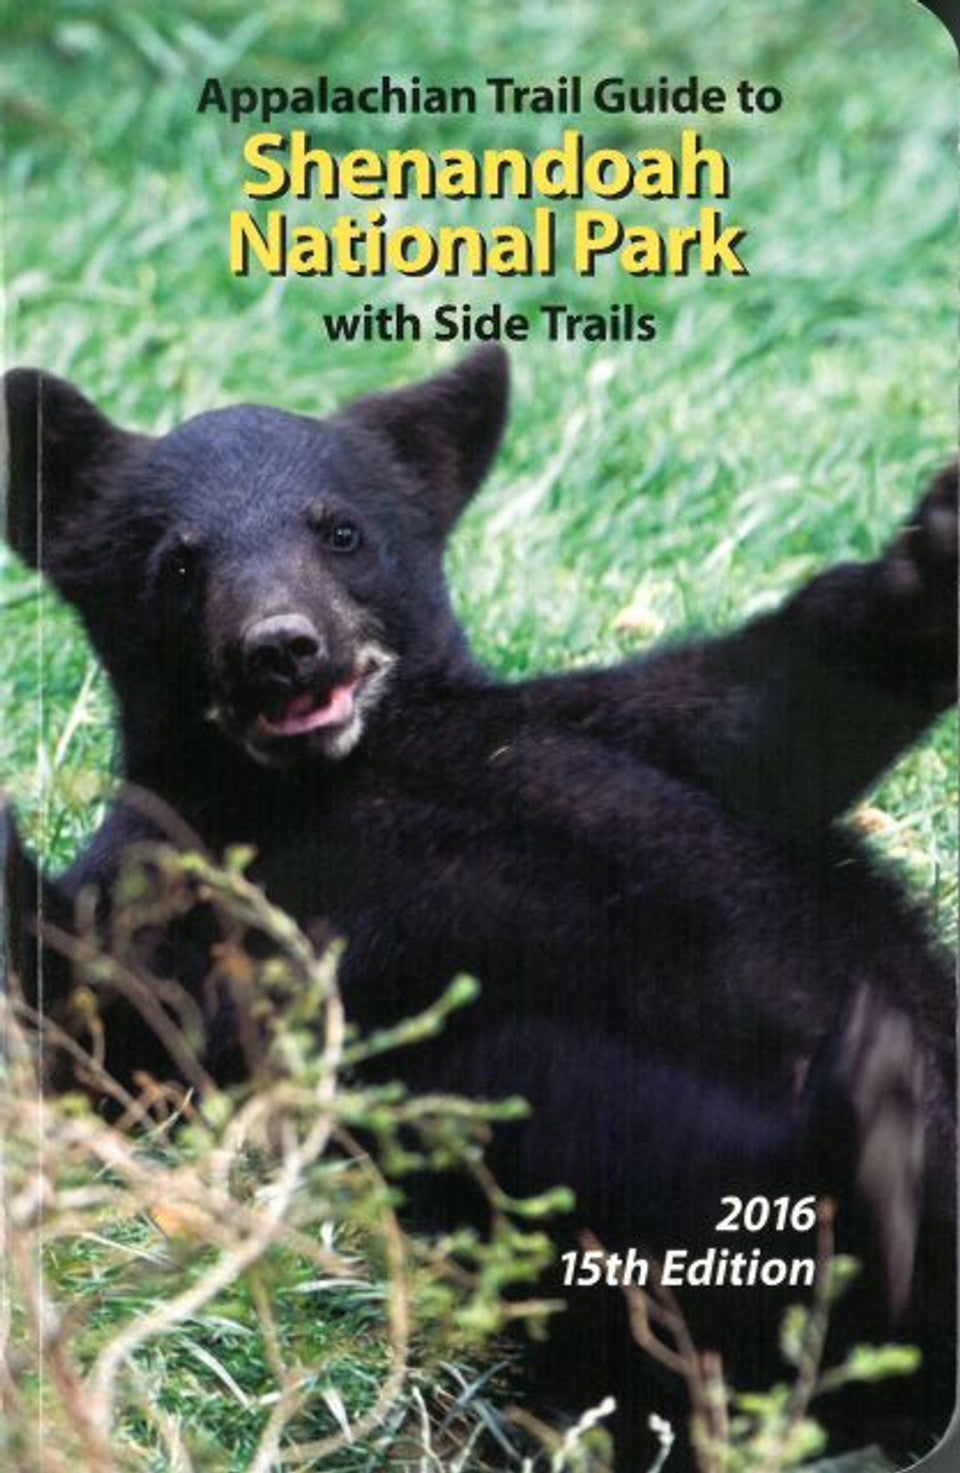 Appalachian Trail Guide to Shenandoah National Park with Side Trails 2012